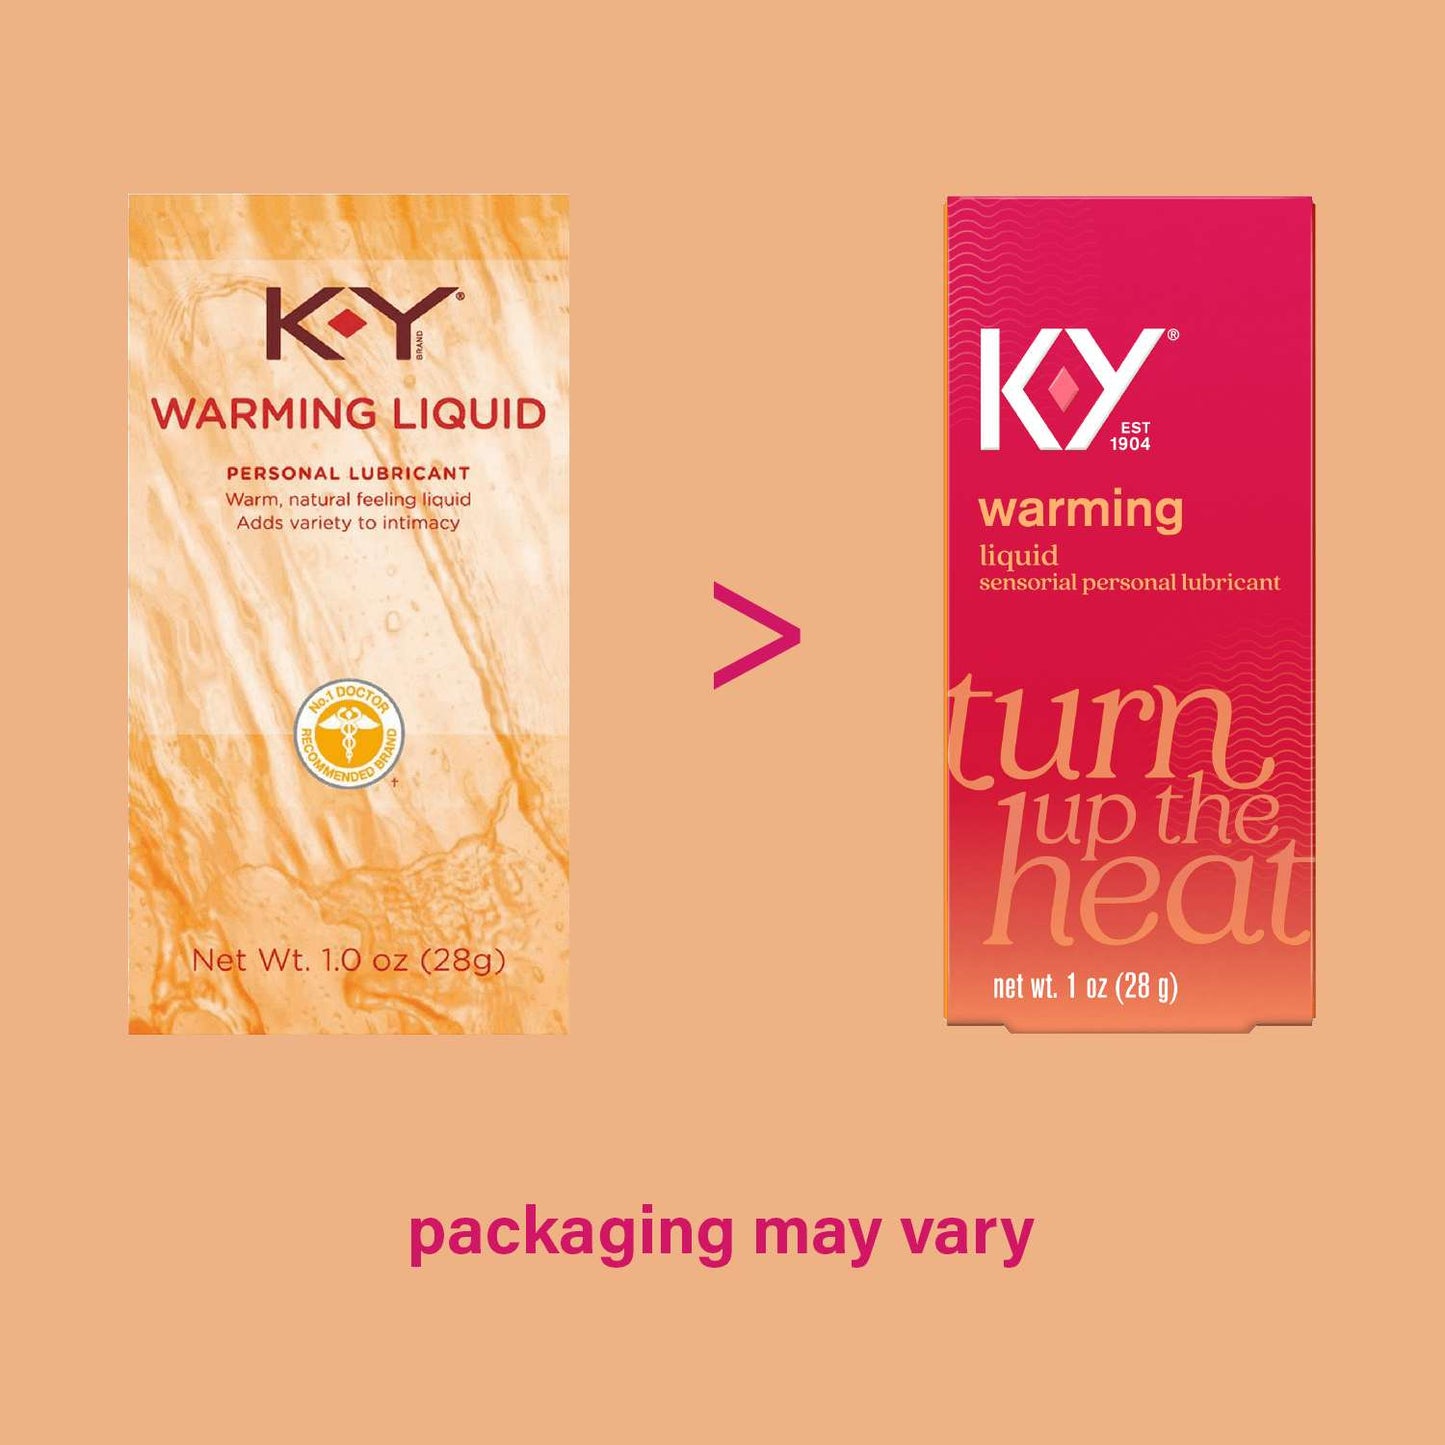 New packaging for K-Y Warming Liquid